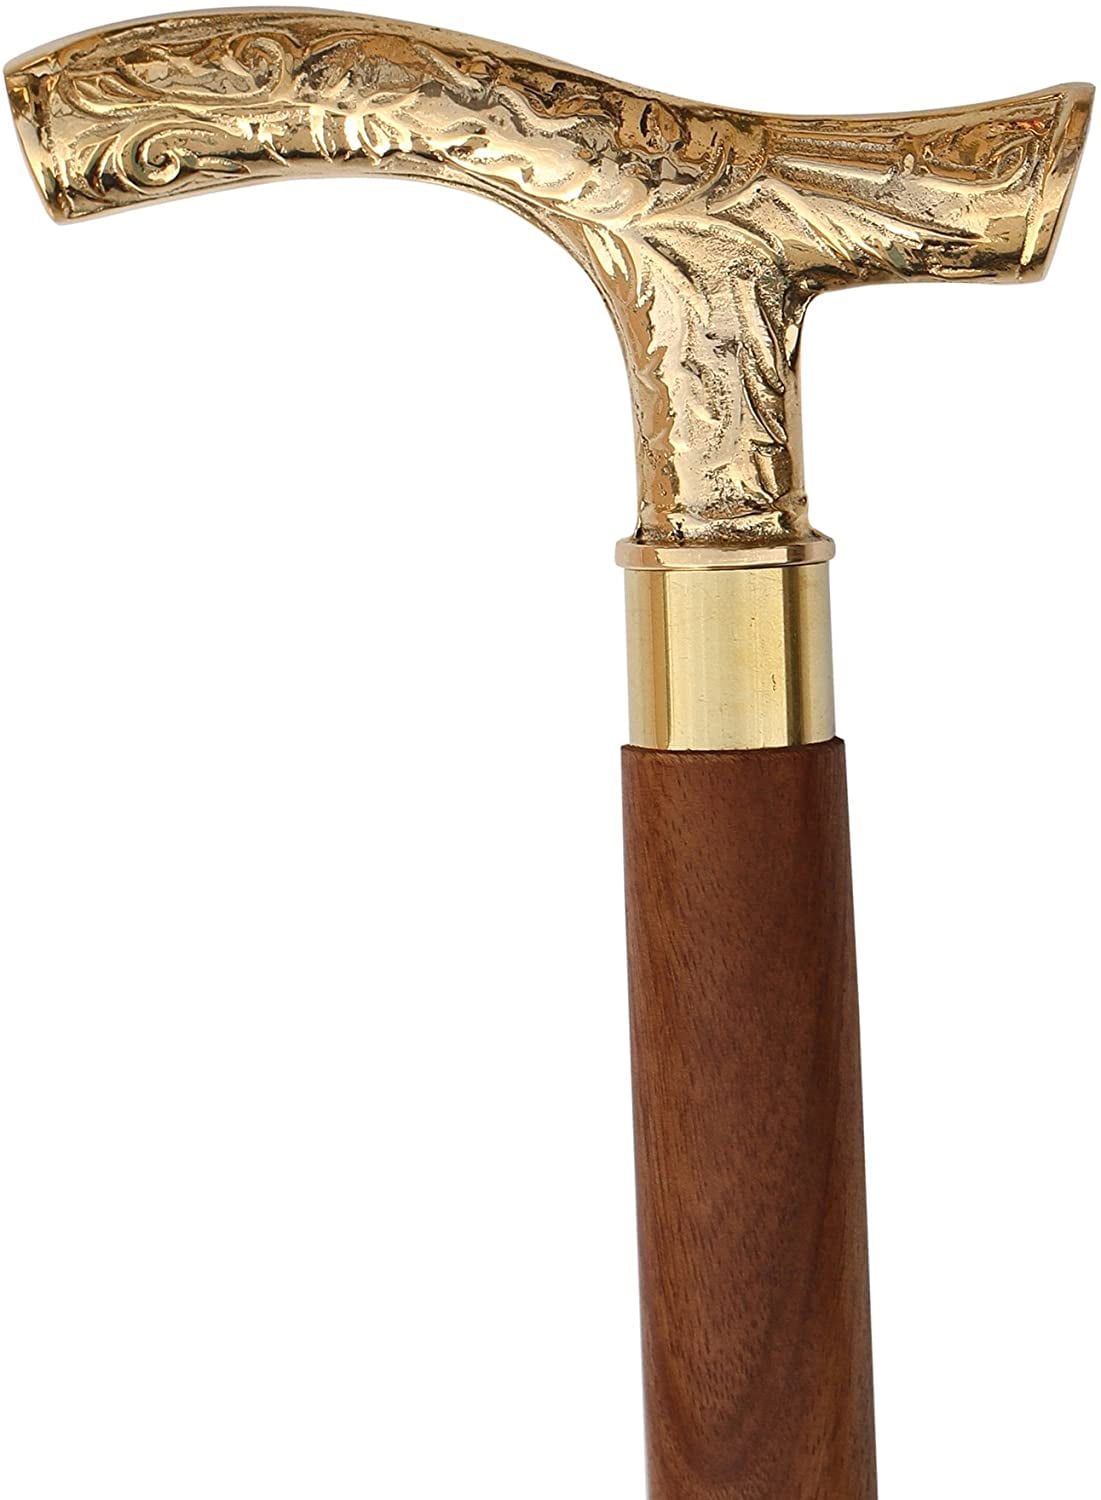 Details about   Antique Foldable wooden walking sticks with antique brass handle Cane Gift 